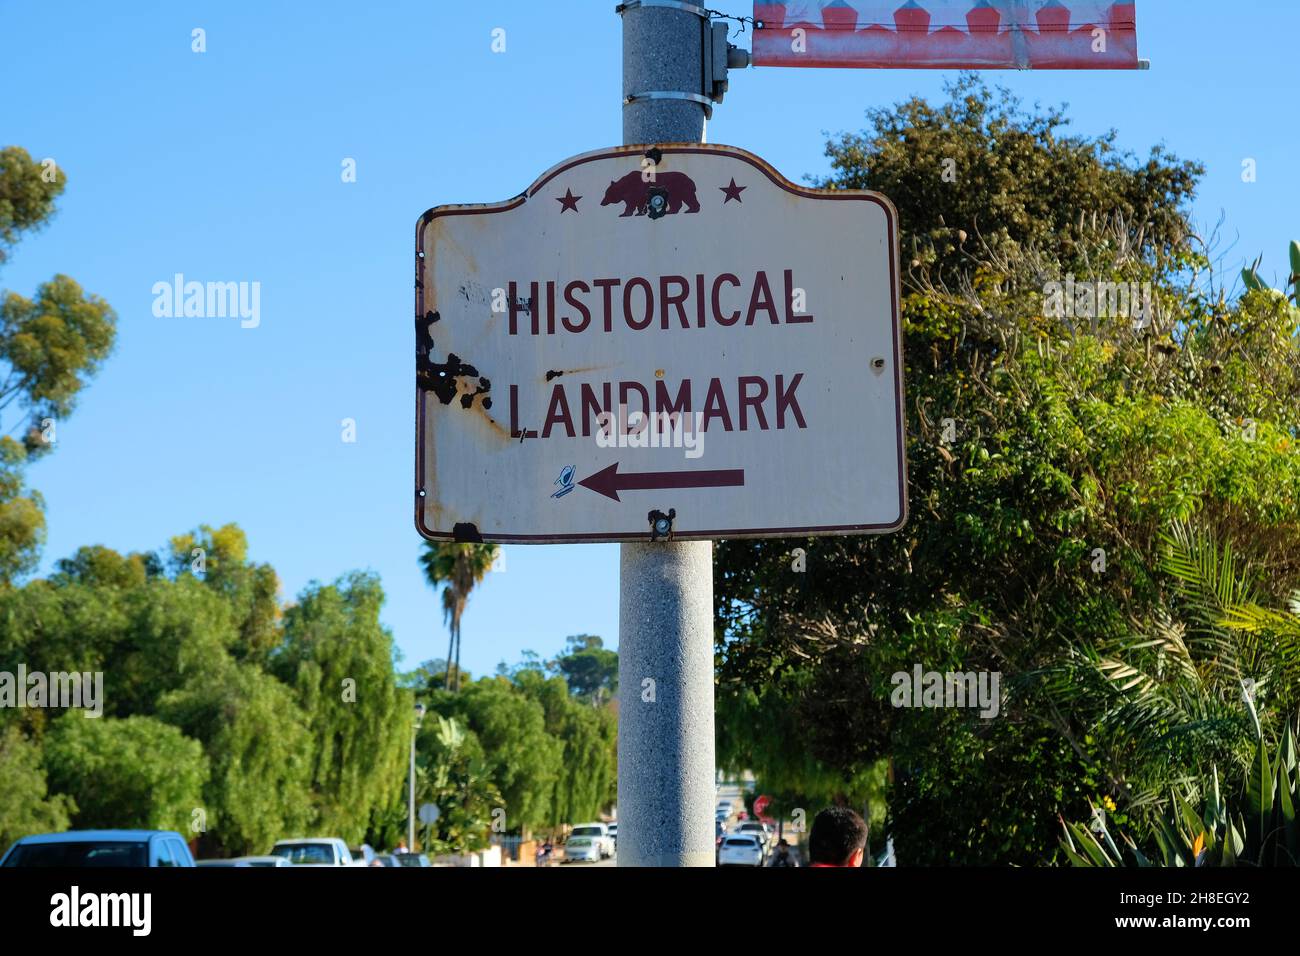 Generic California historical landmark sign in San Diego, California with the symbolic grizzly bear (Ursus californicus) found also on the state flag. Stock Photo